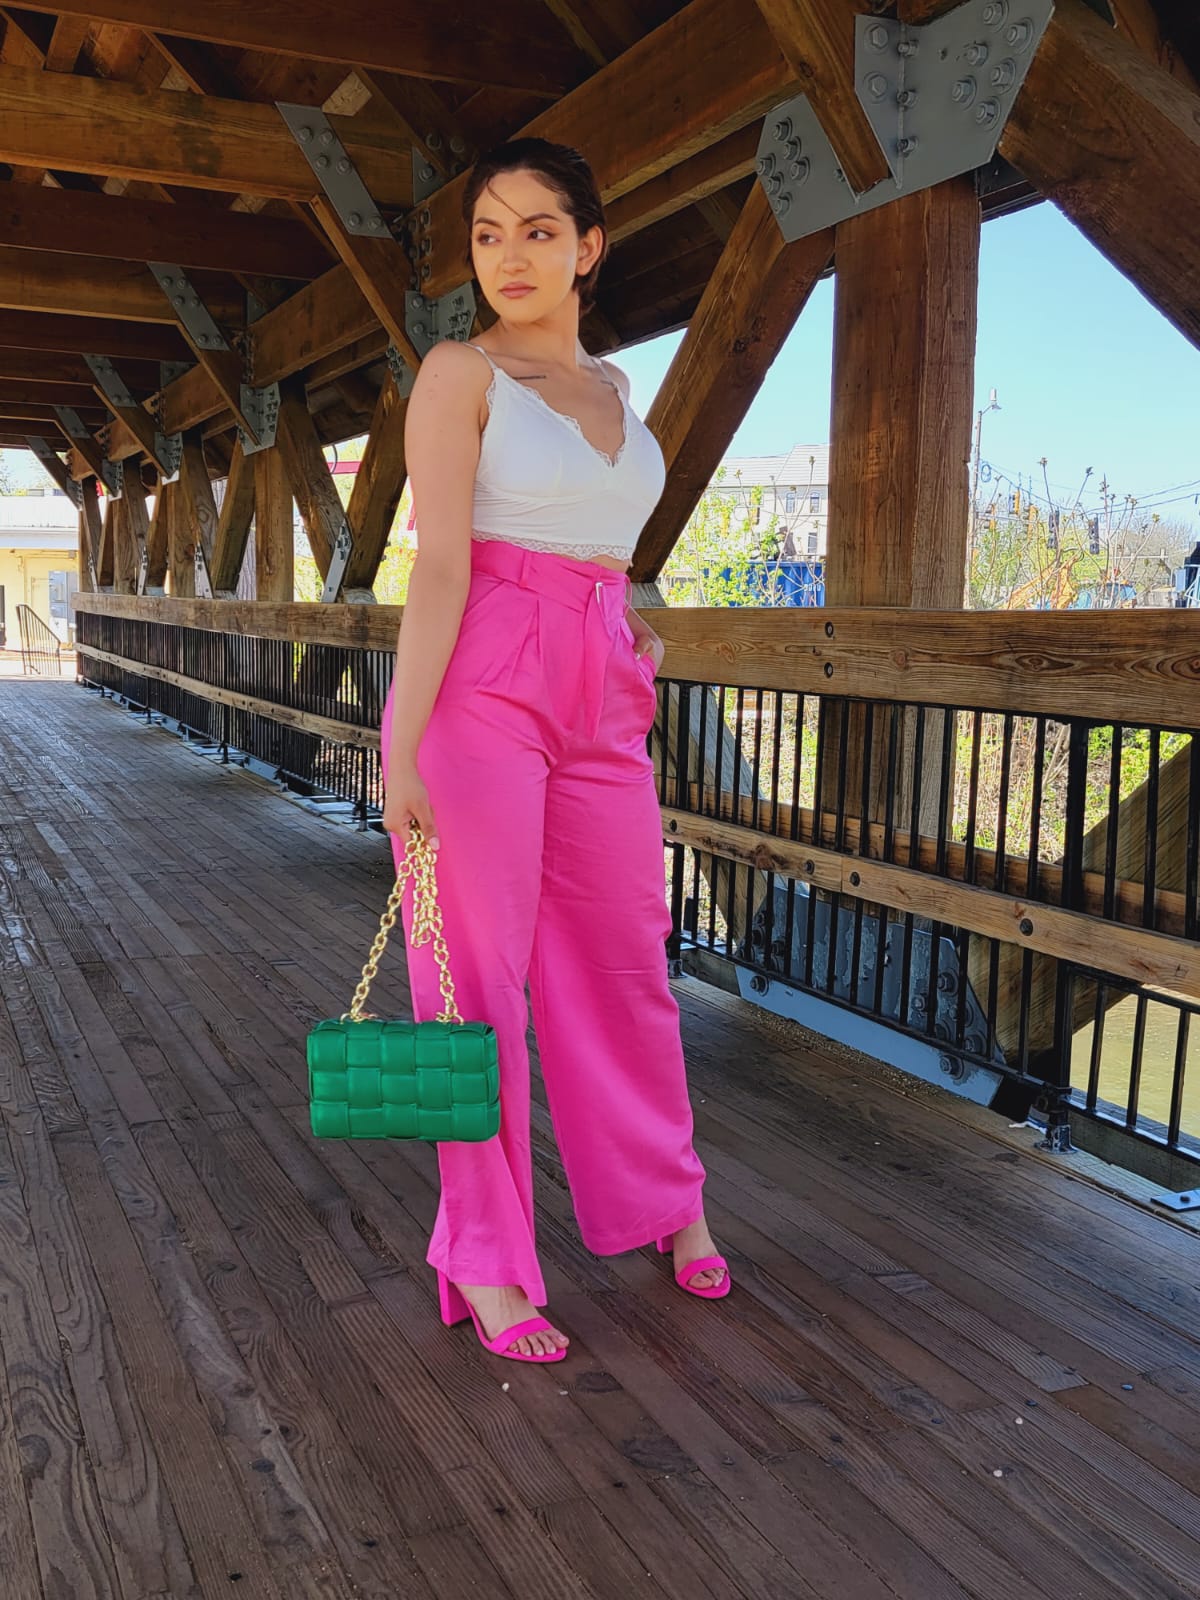 Women's Hot Pink Turtleneck, Hot Pink Dress Pants, White Leather Pumps, Hot  Pink Leather Clutch | Lookastic